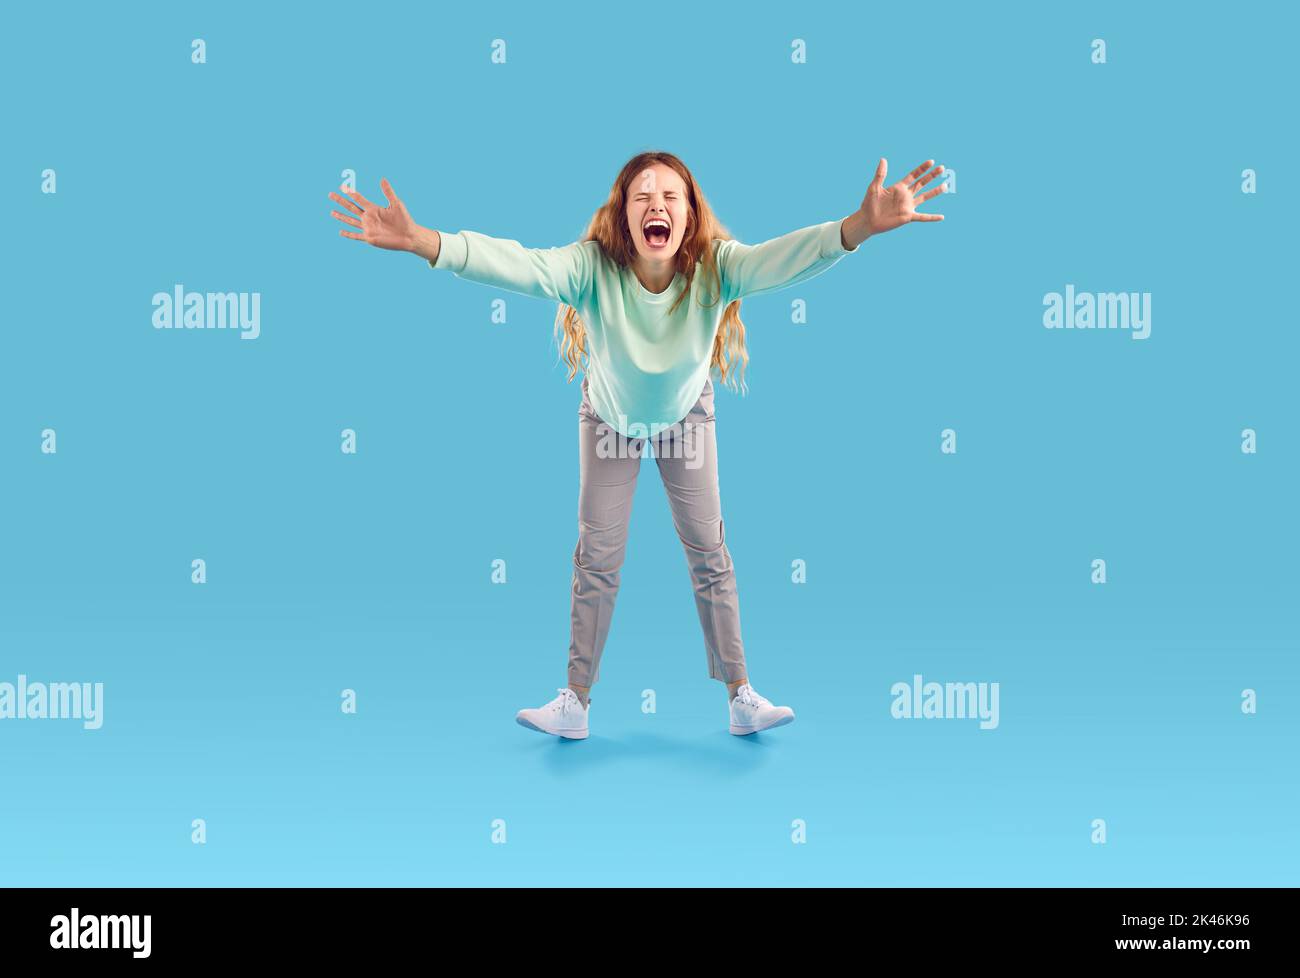 Funny emotional woman stretches her hands to camera, excited to see you and screaming for joy. Stock Photo